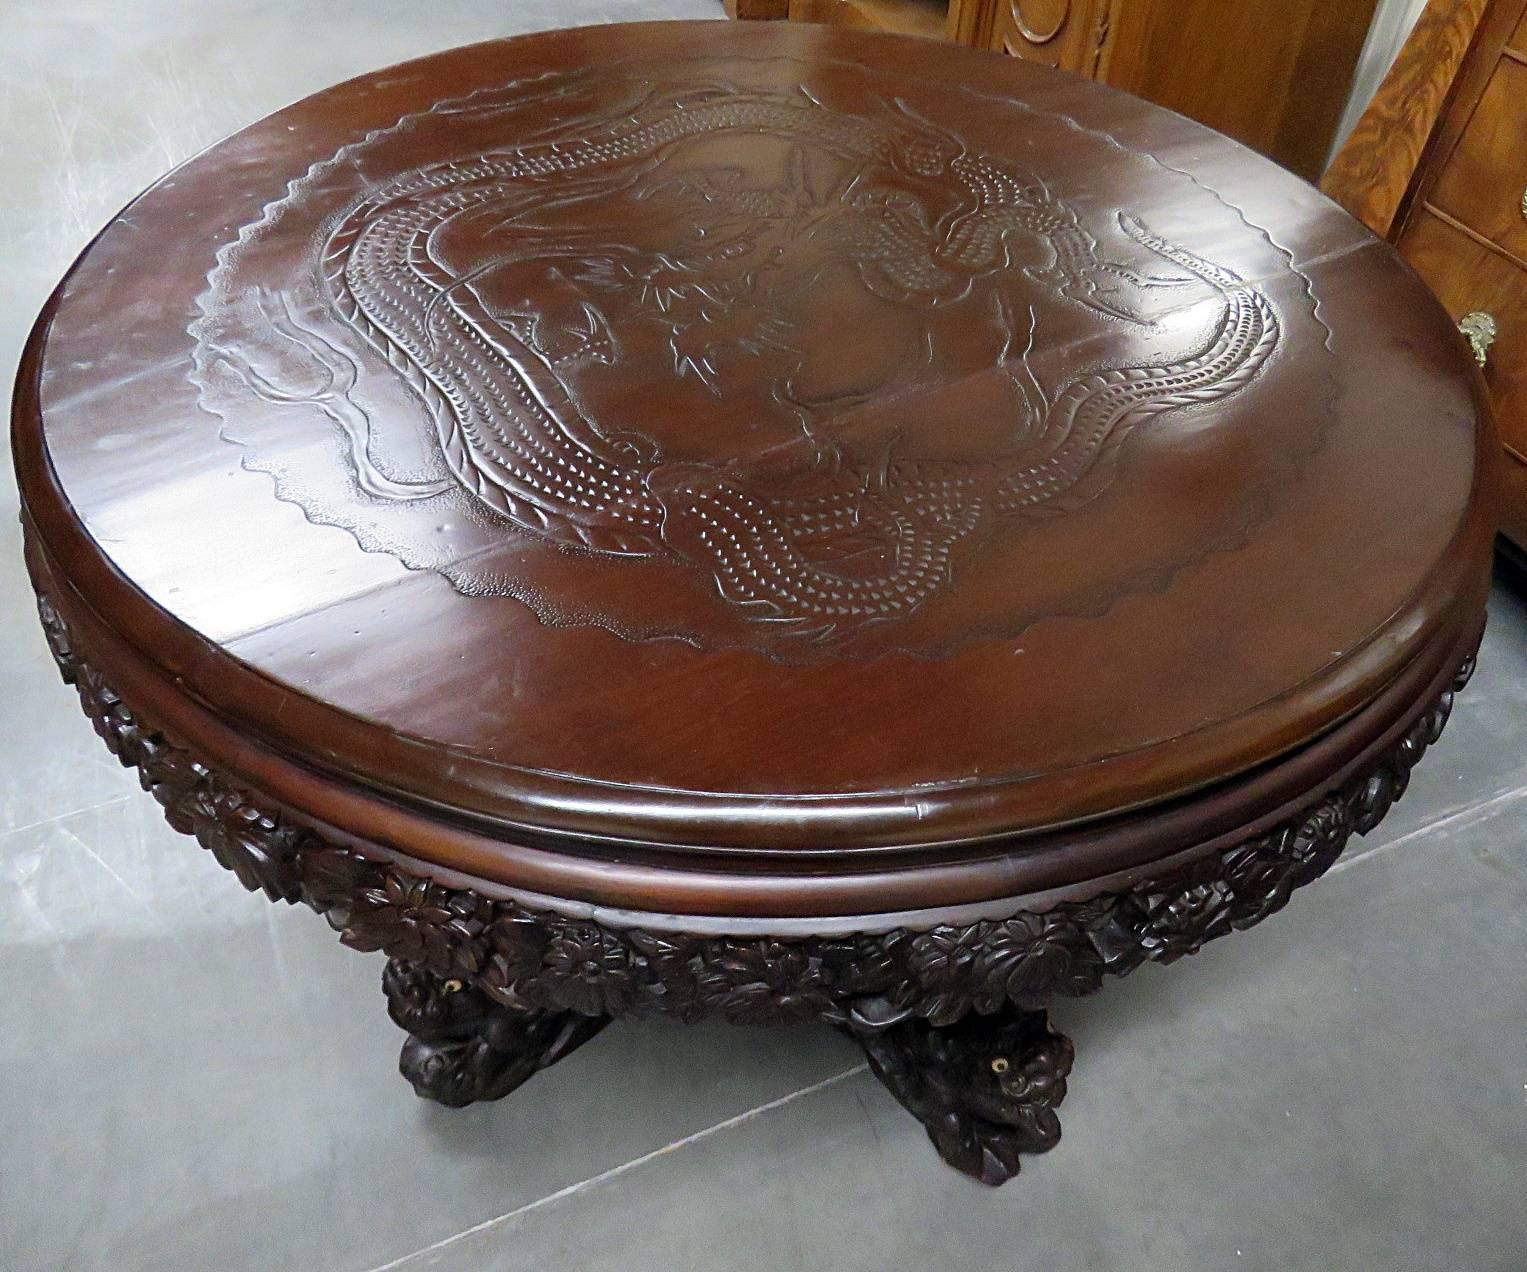 Intricately carved Asian center table. Beautiful dragon carved in to top with a foo dog base.